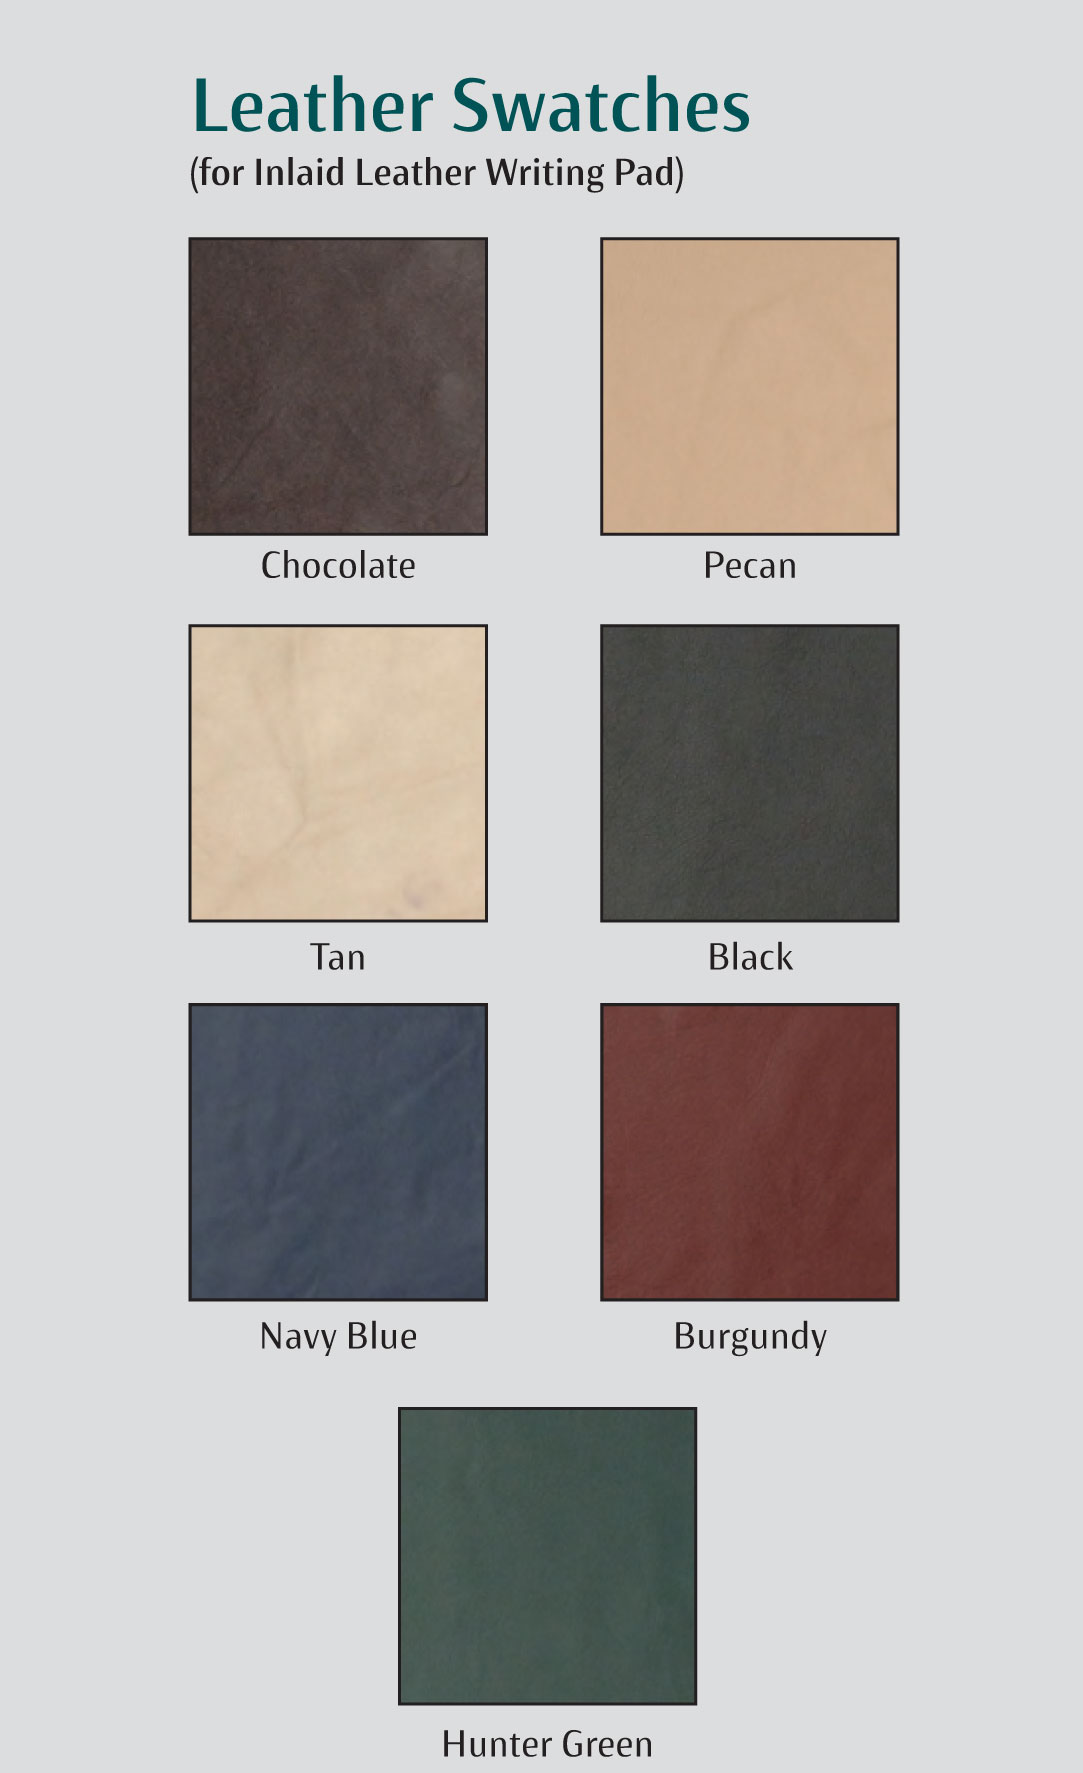 Leather Swatches for Optional Inlaid Leather Writing Pad